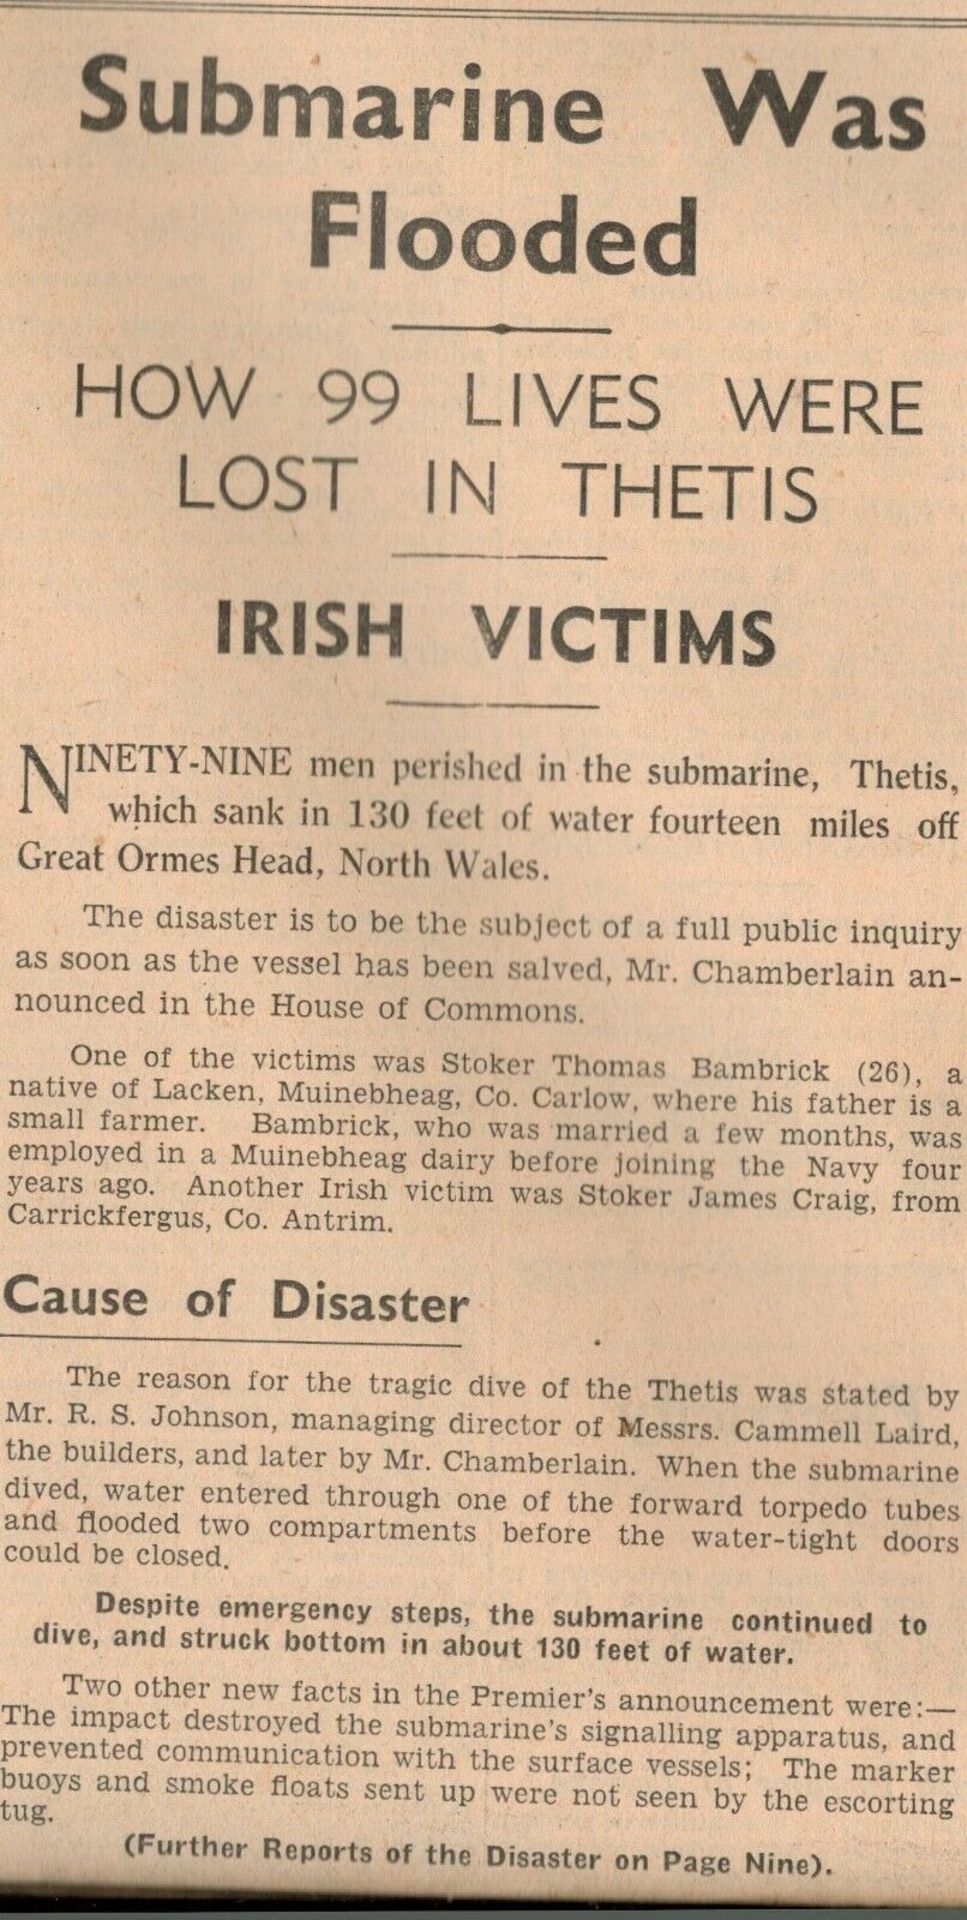 Irish Independence 1939 News WW2 GAA Reports, Adverts, RTE Guide-2 - Image 4 of 8